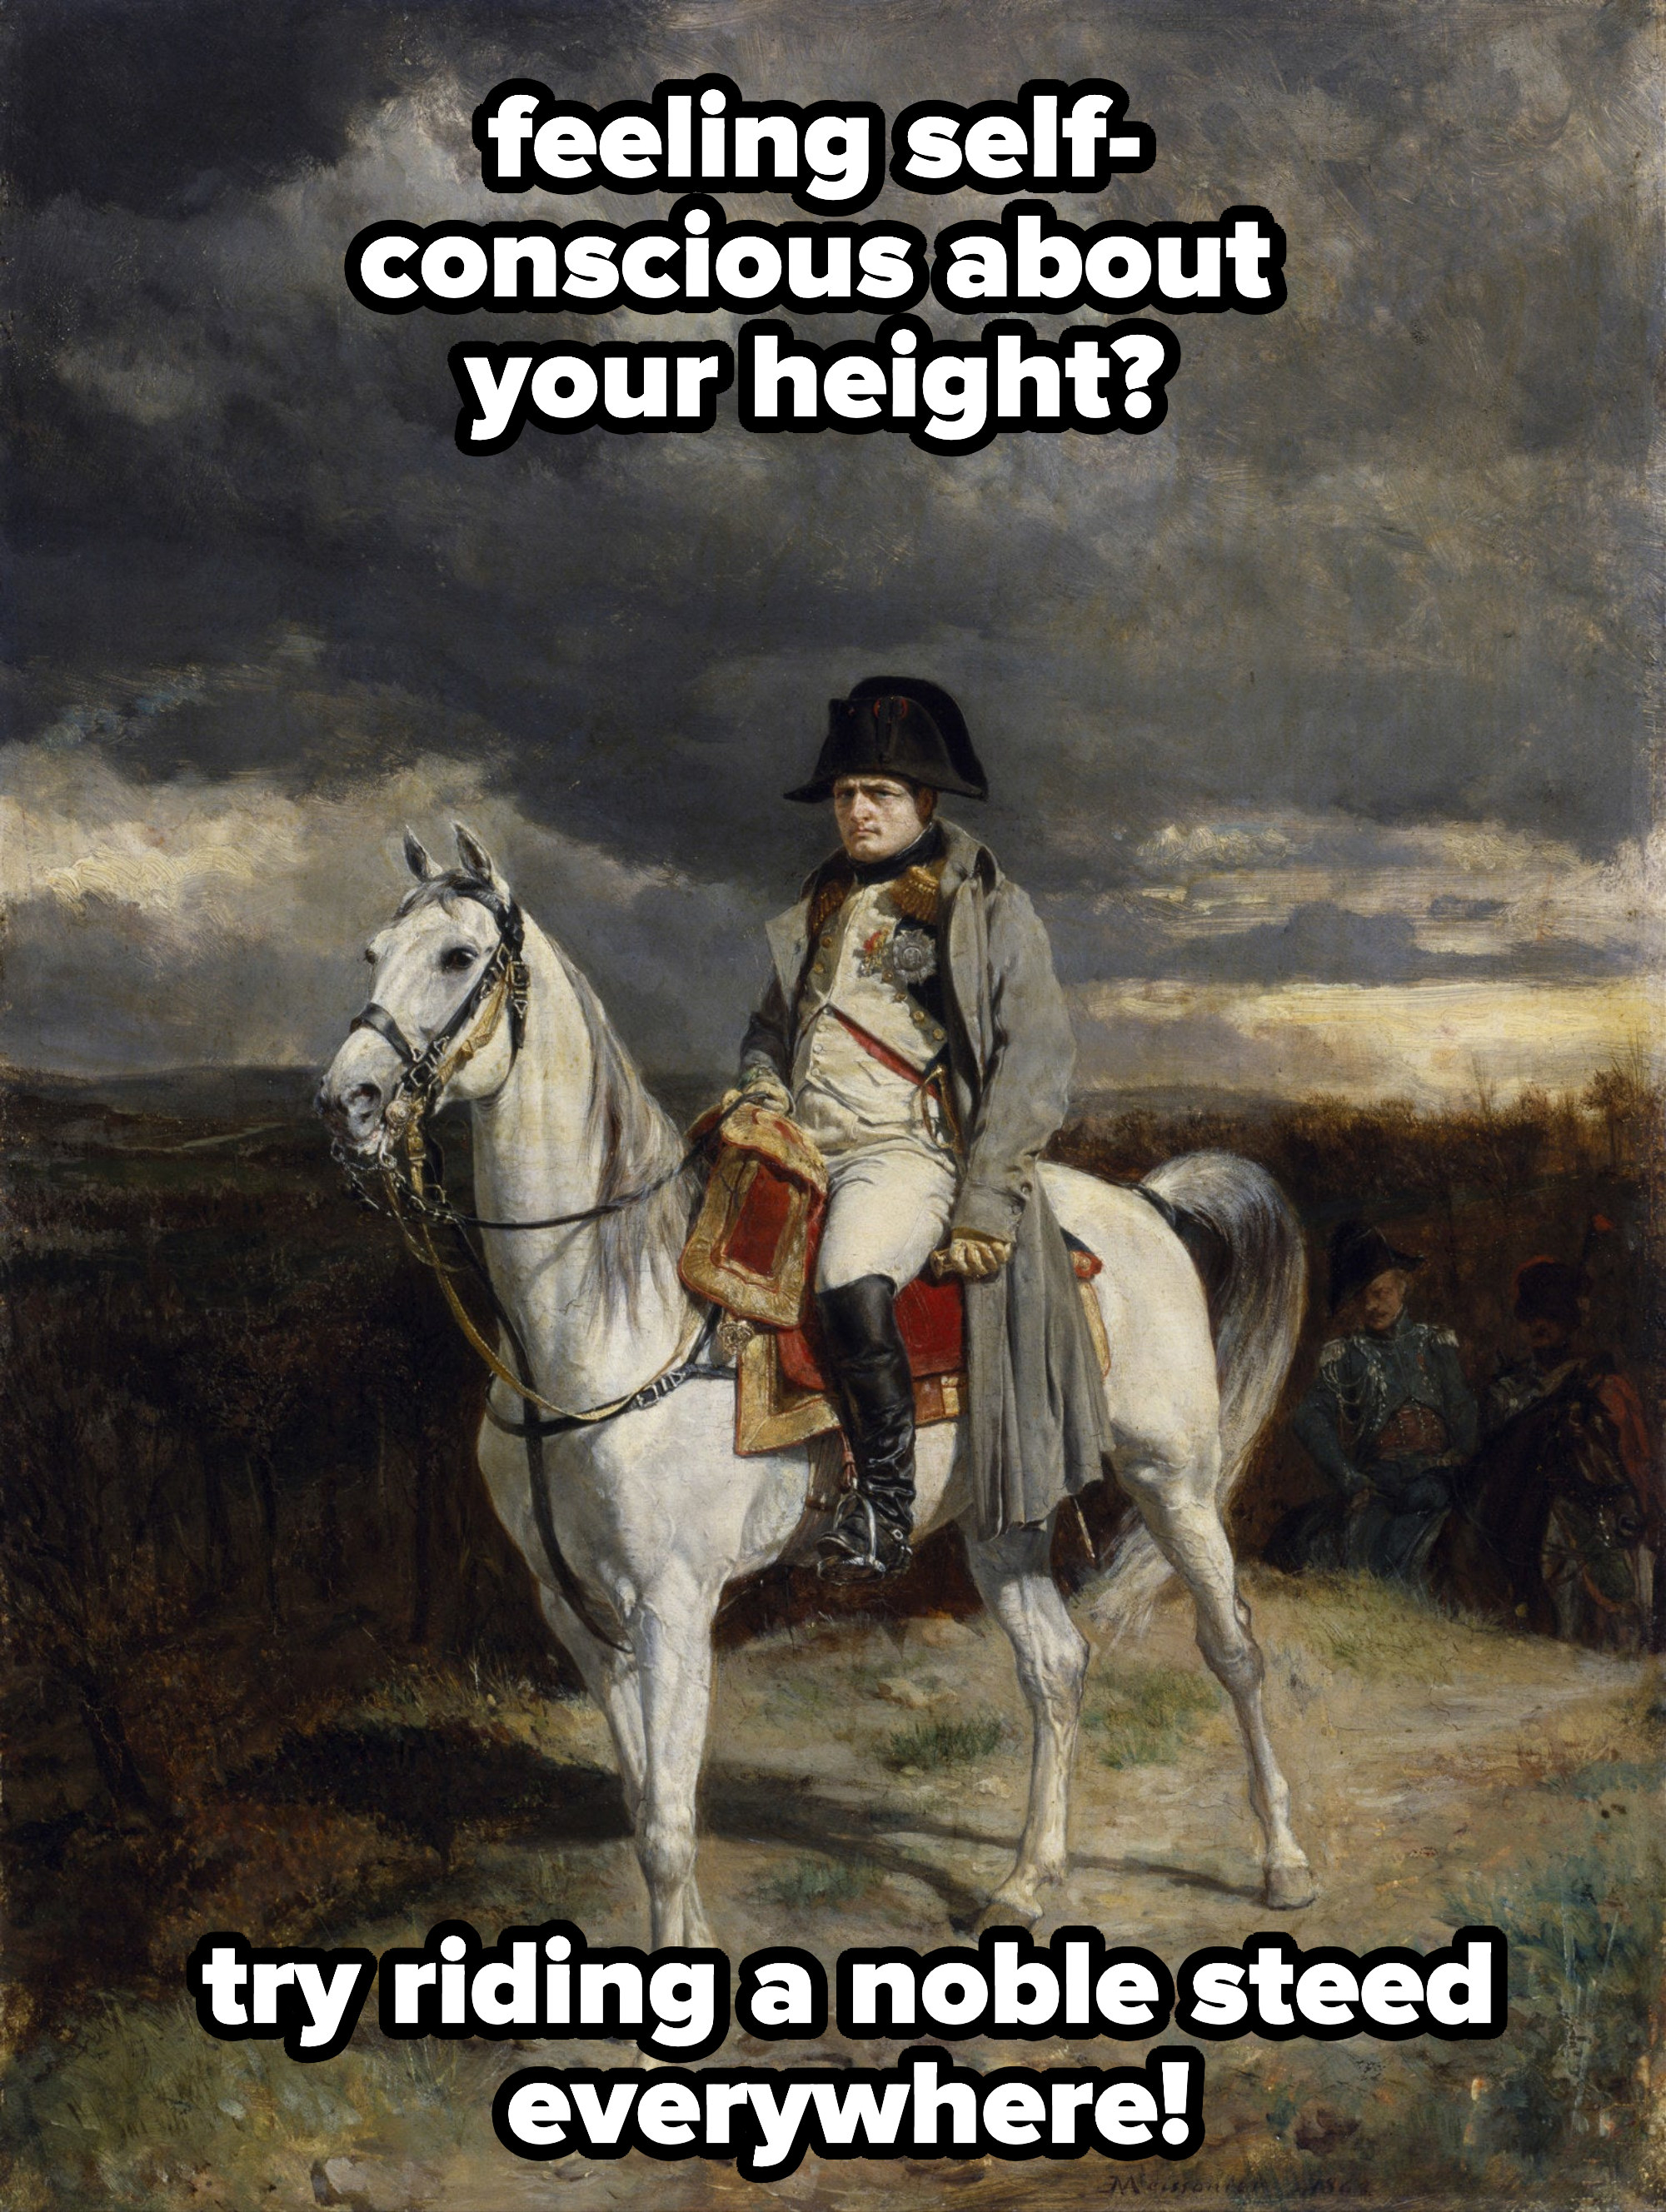 Napoleon on horseback, with caption: feeling self-conscious about your height? try riding a noble steed everywhere!